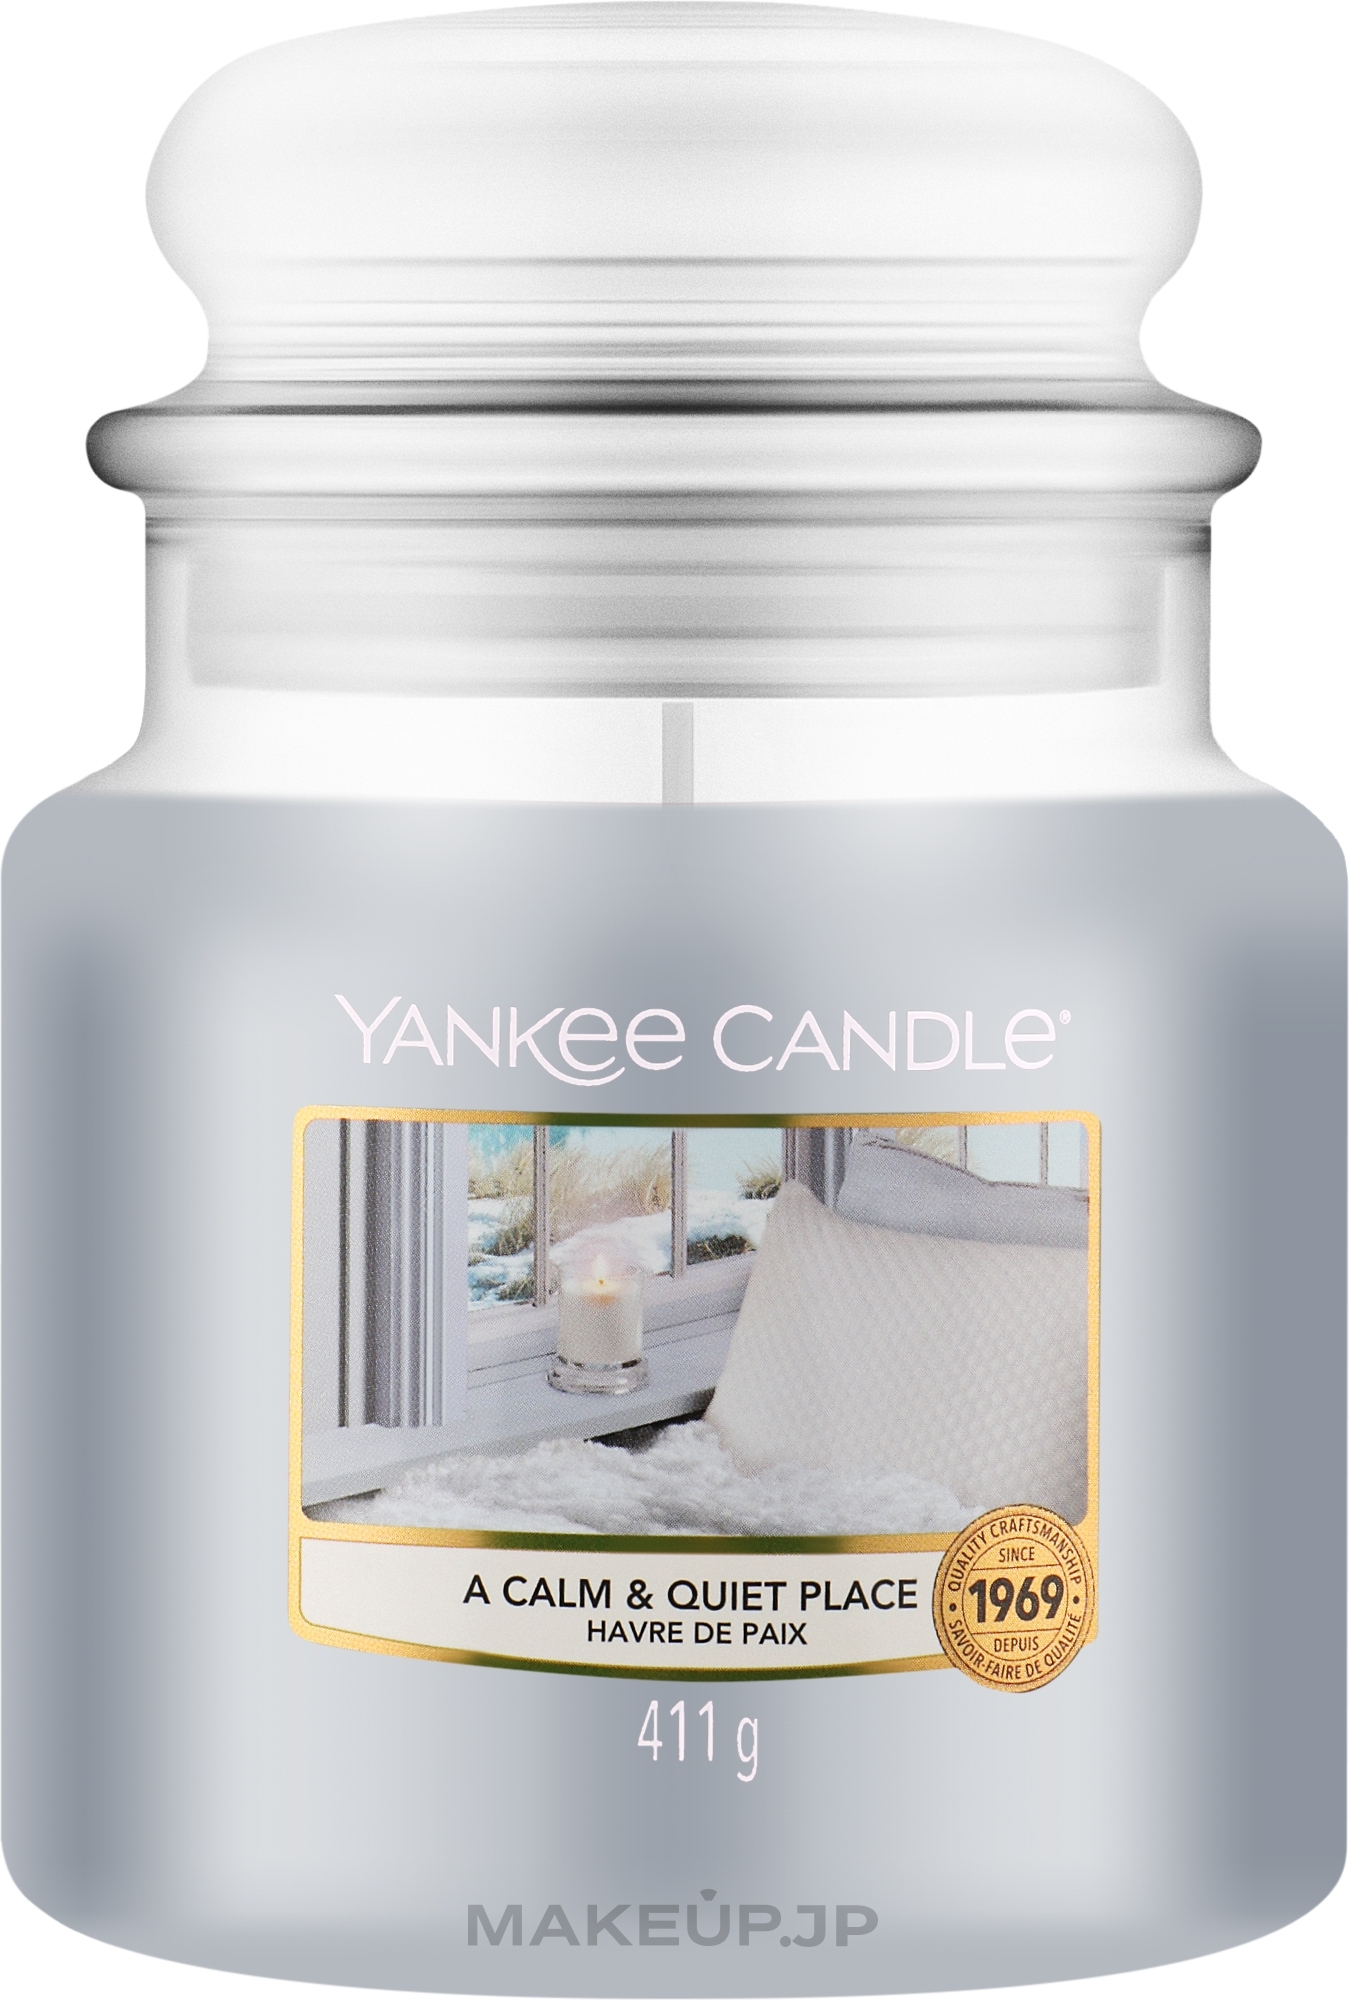 Scented Candle "A Calm & Quiet Place" - Yankee Candle A Calm & Quiet Place — photo 411 g